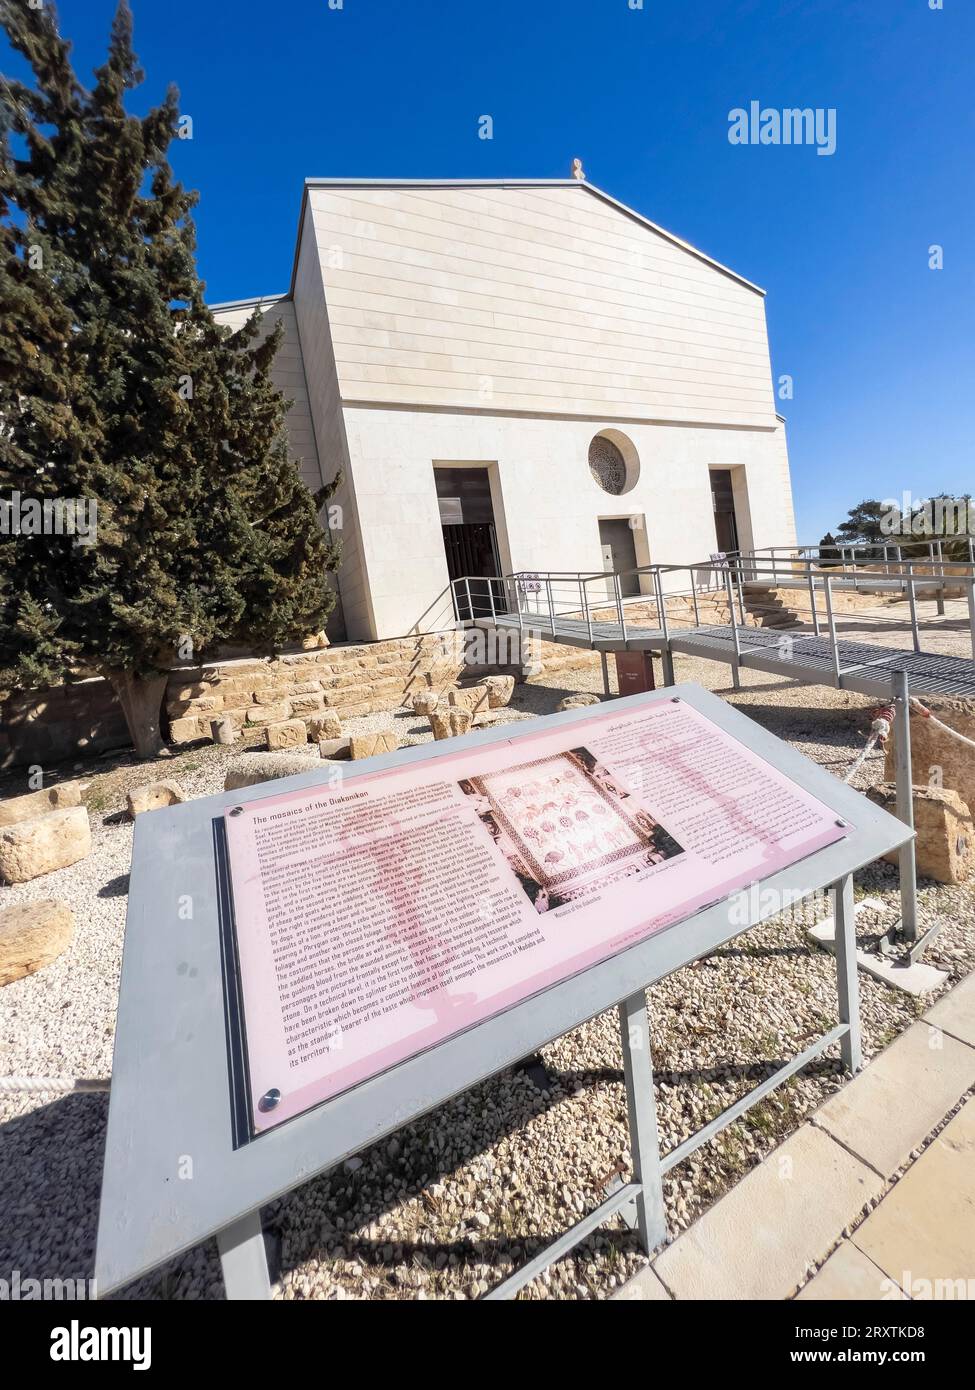 Exterior view of the Christian church from Byzantine times that stands on the top of Mount Nebo, Jordan, Middle East Stock Photo